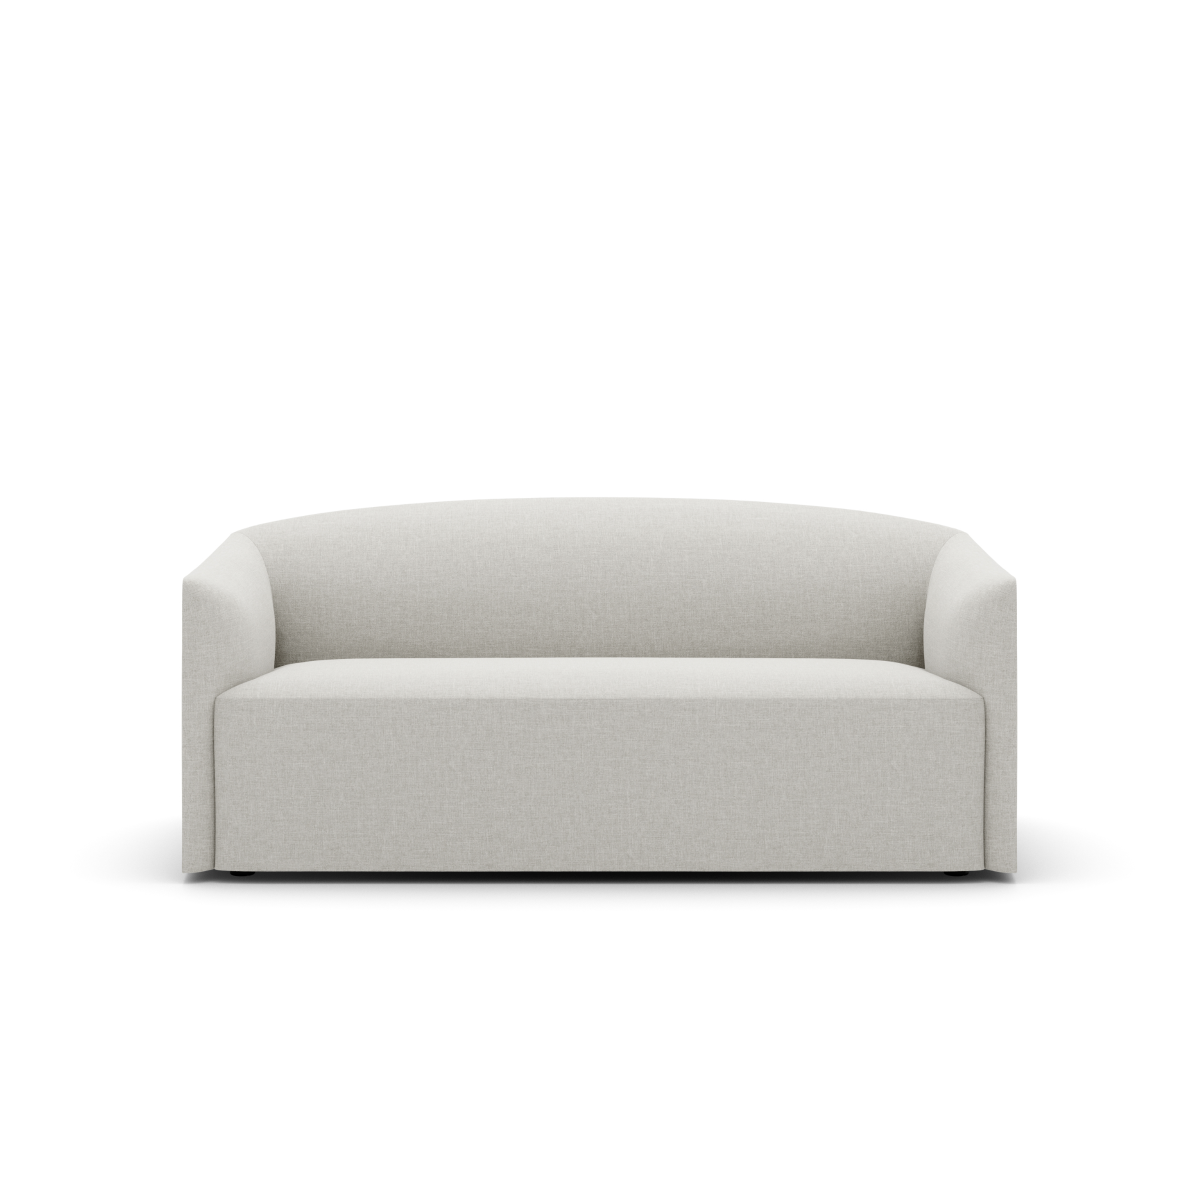 New Works Shore Sofa 2 Seater Extended Base - Quill